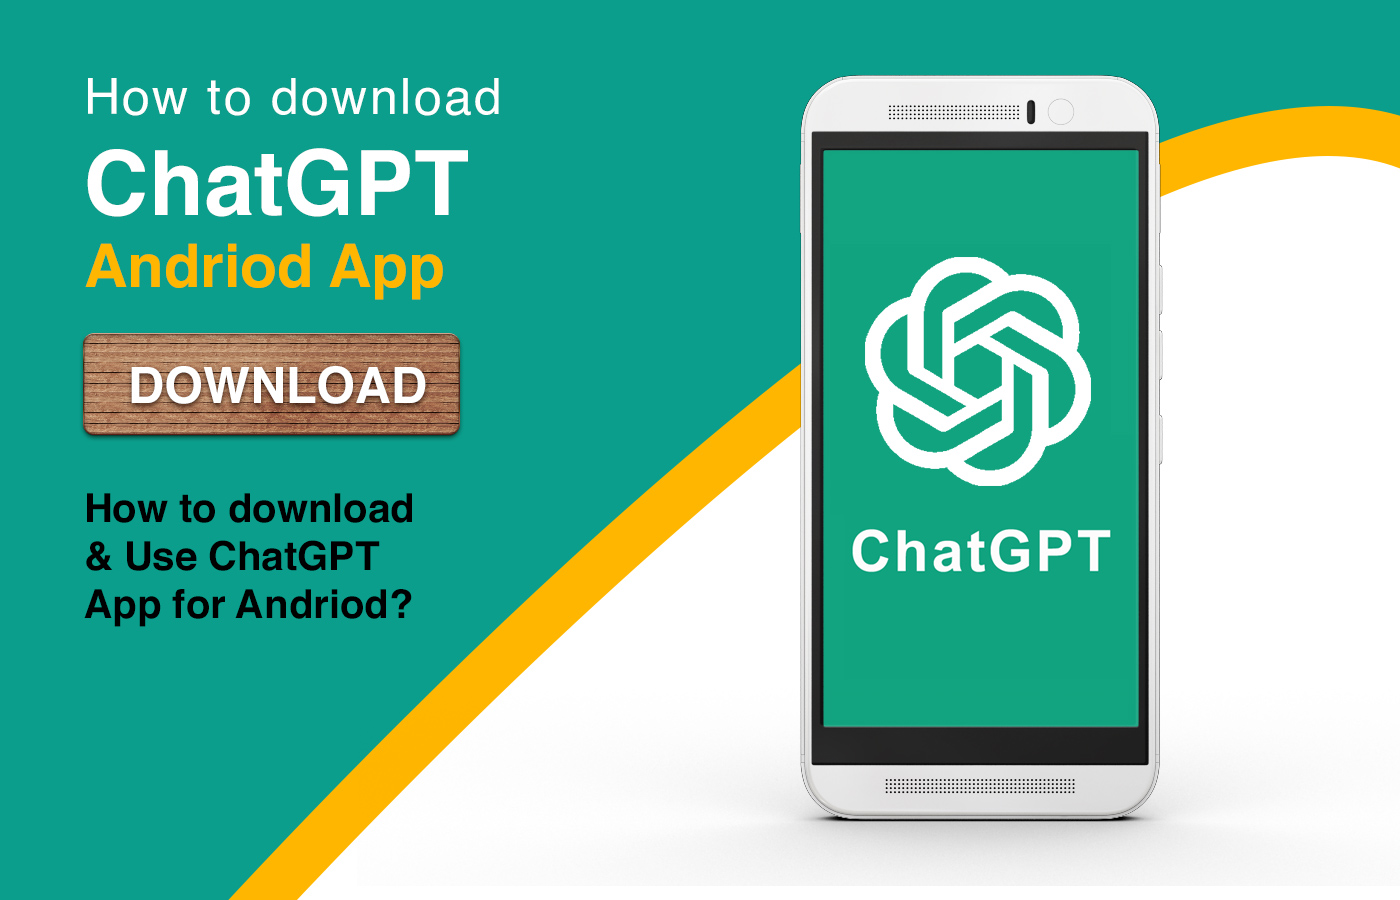 How to Download the ChatGPT App for Android Devices